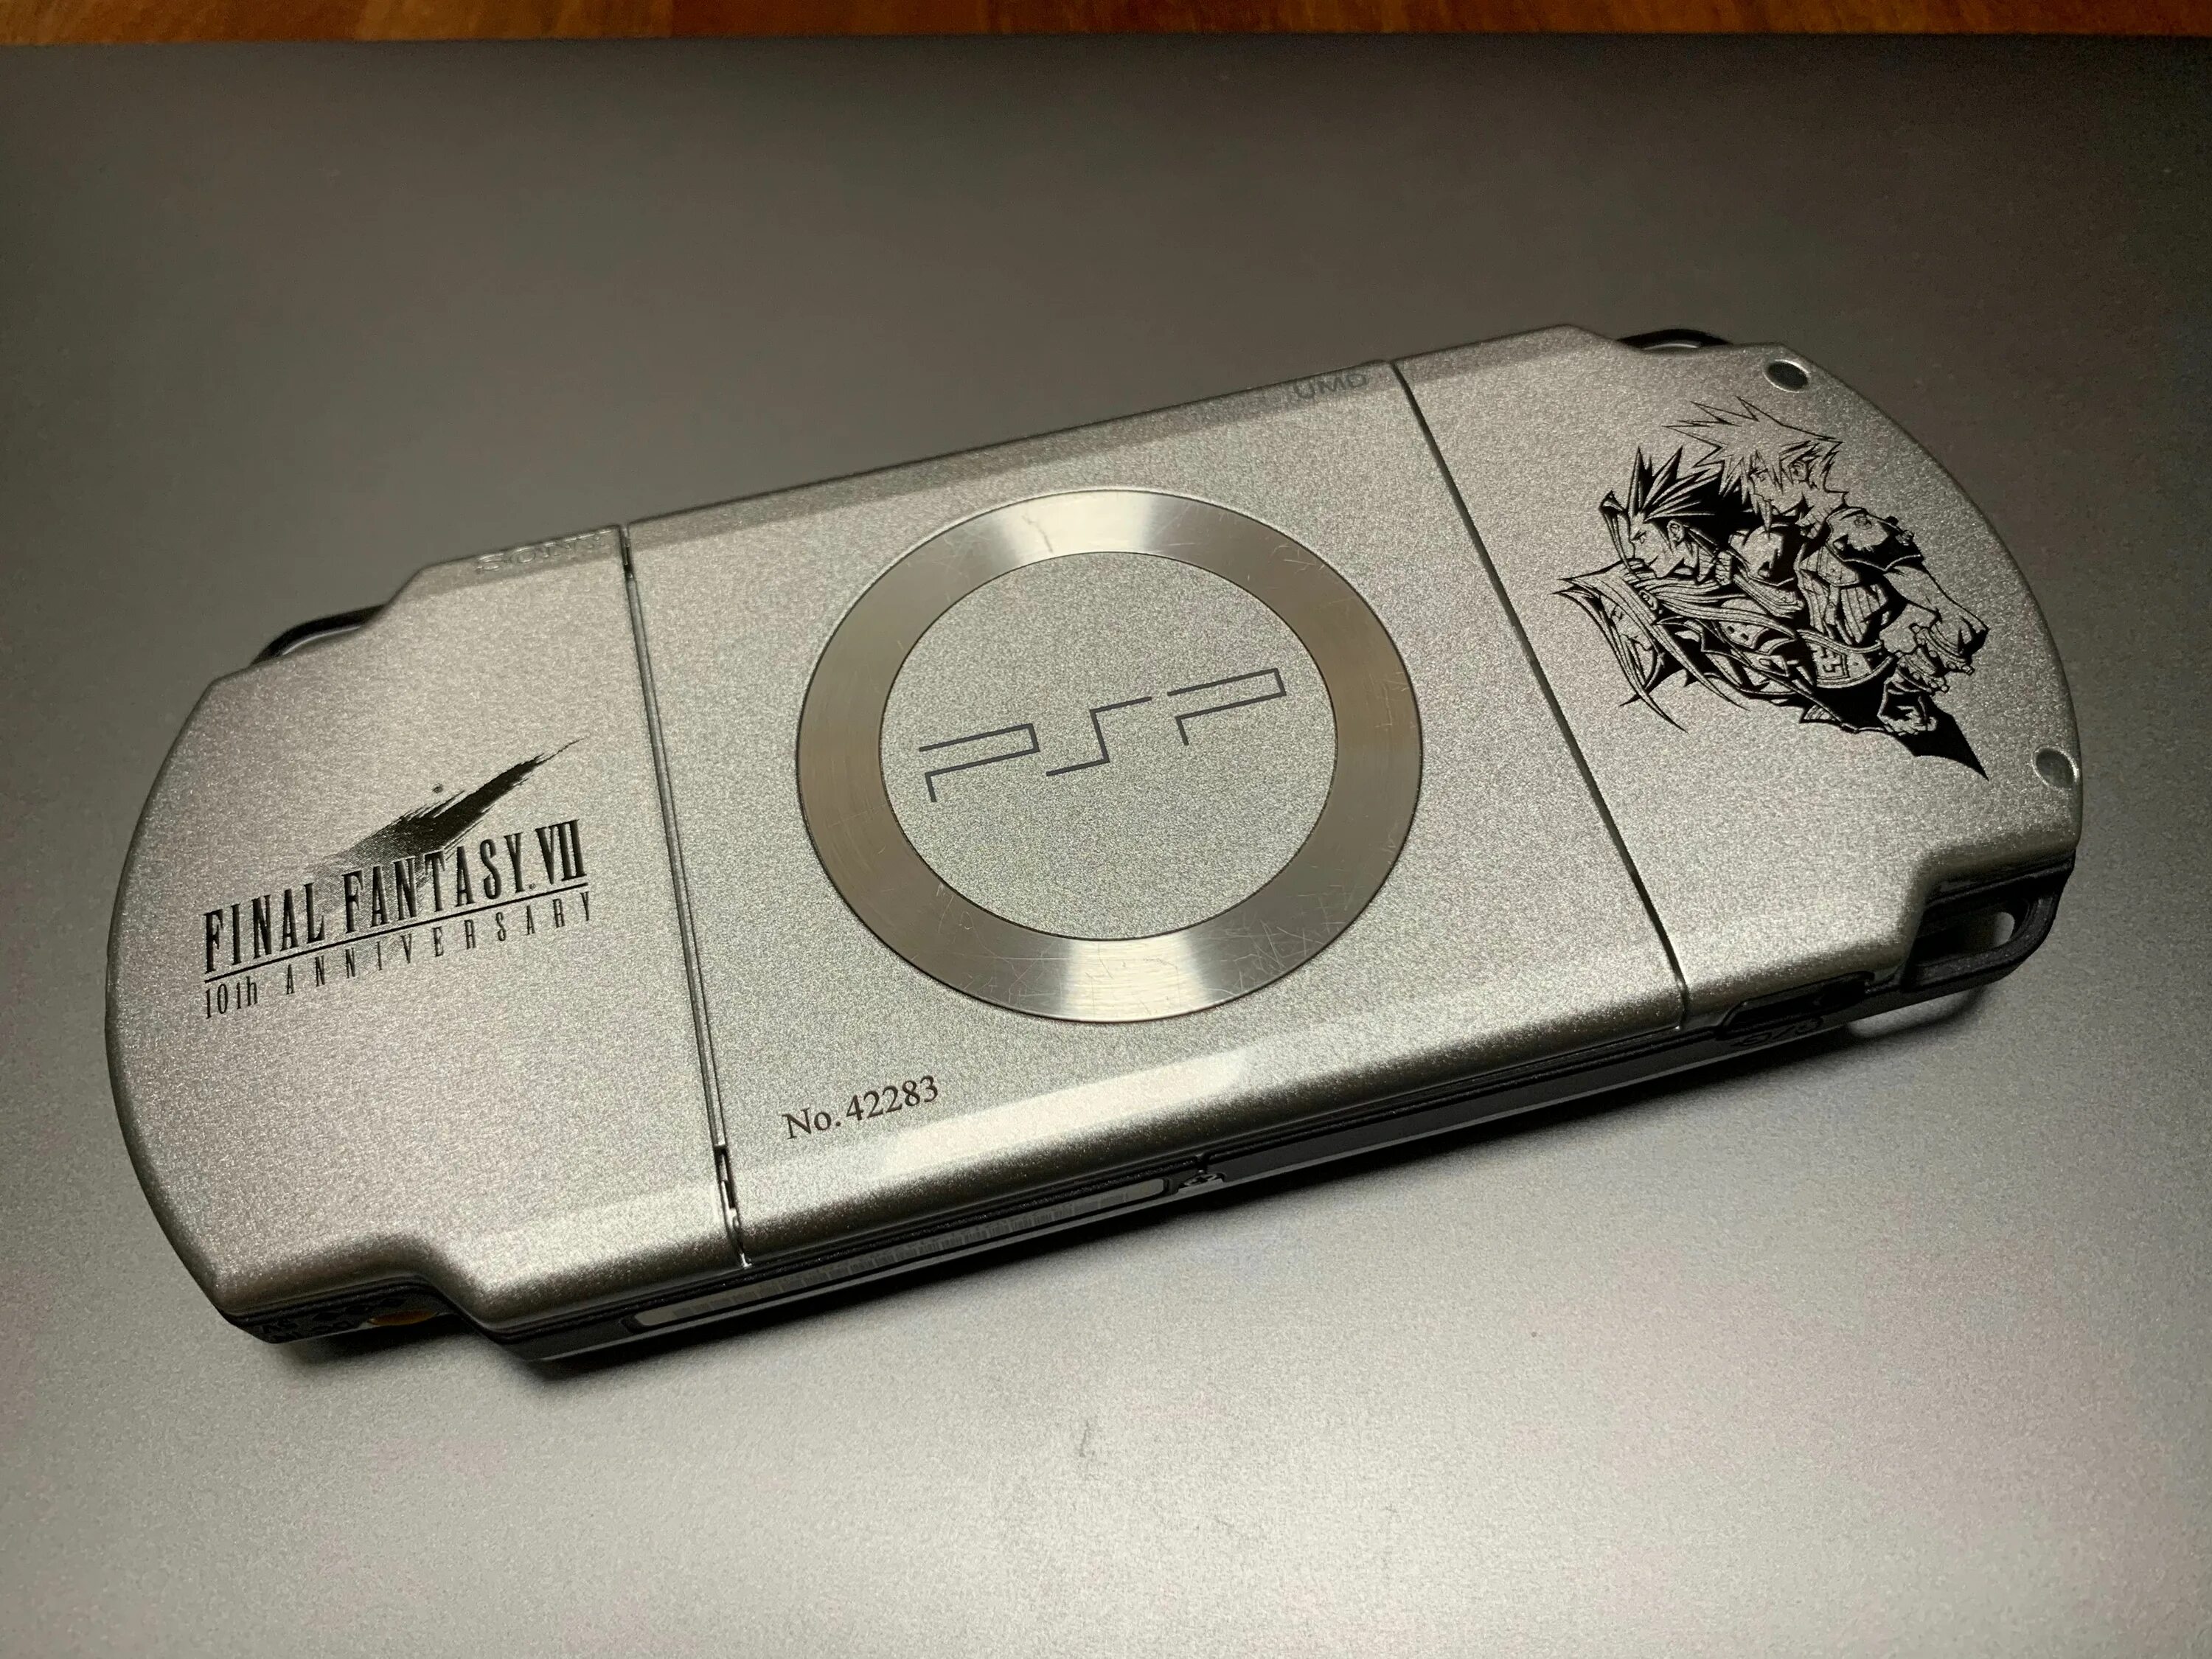 Core limited. PSP 2000 Limited. Корпуса ПСП FF.